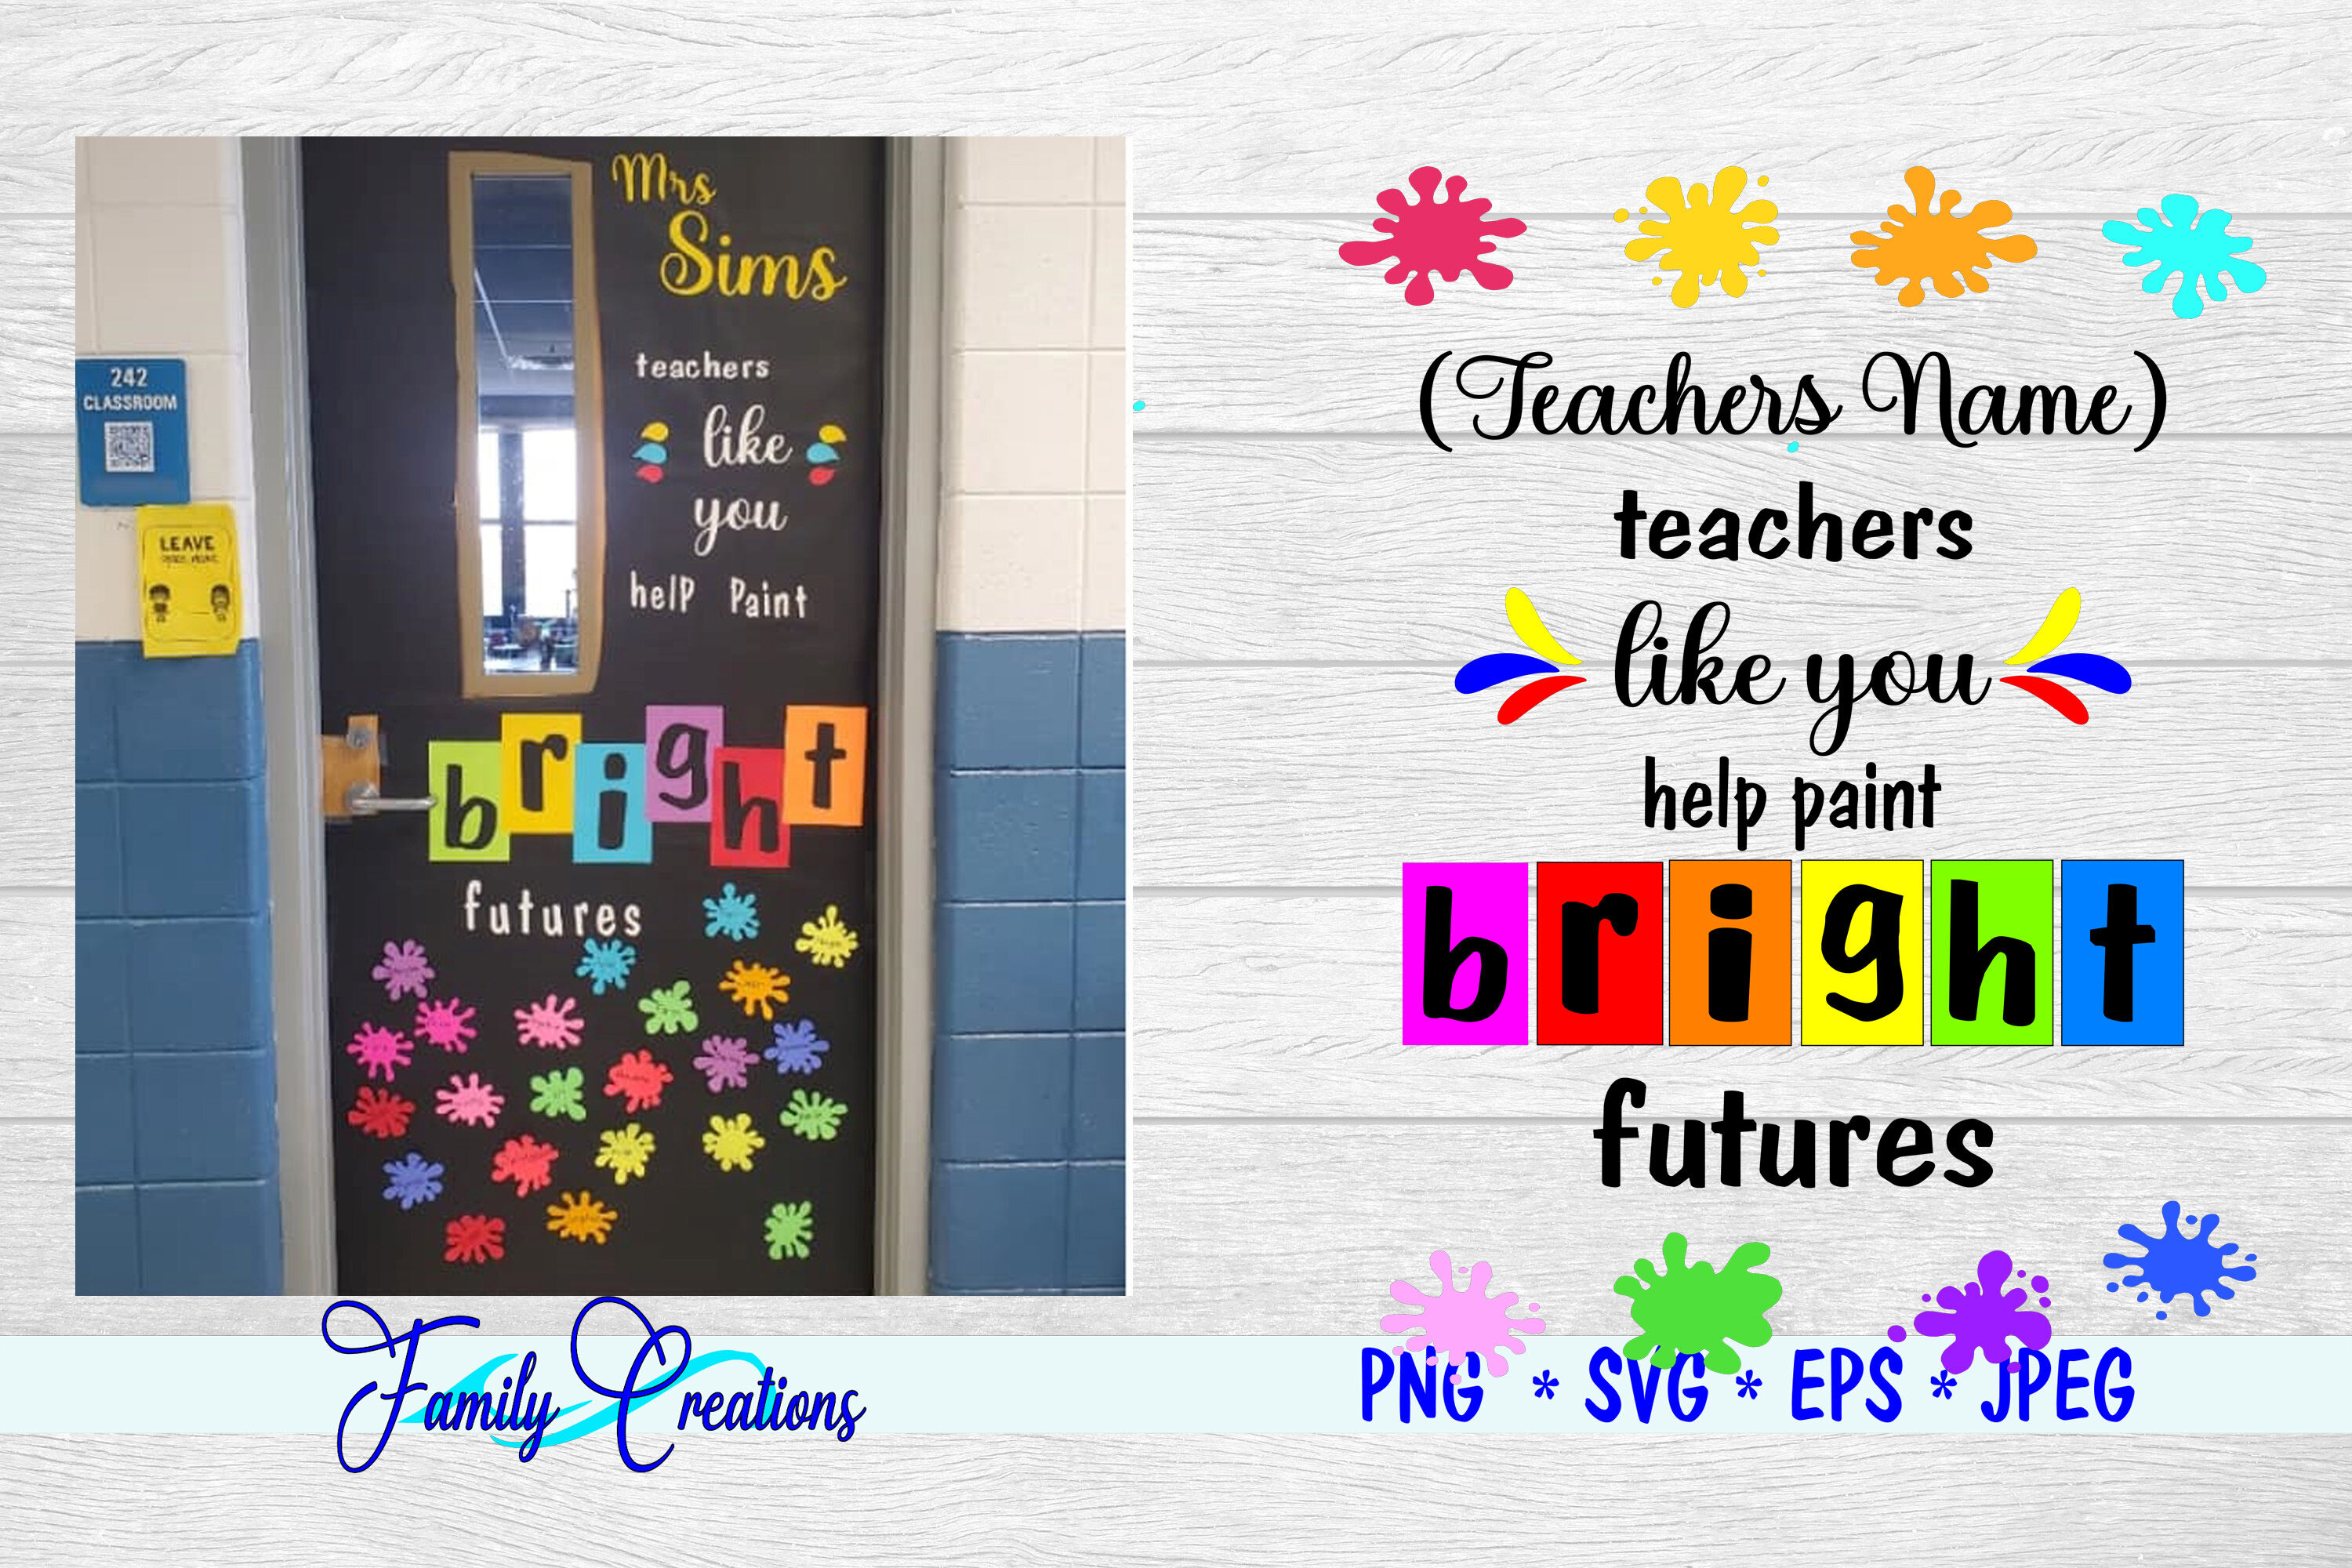 teachers-like-you-help-paint-bright-futures-by-family-creations